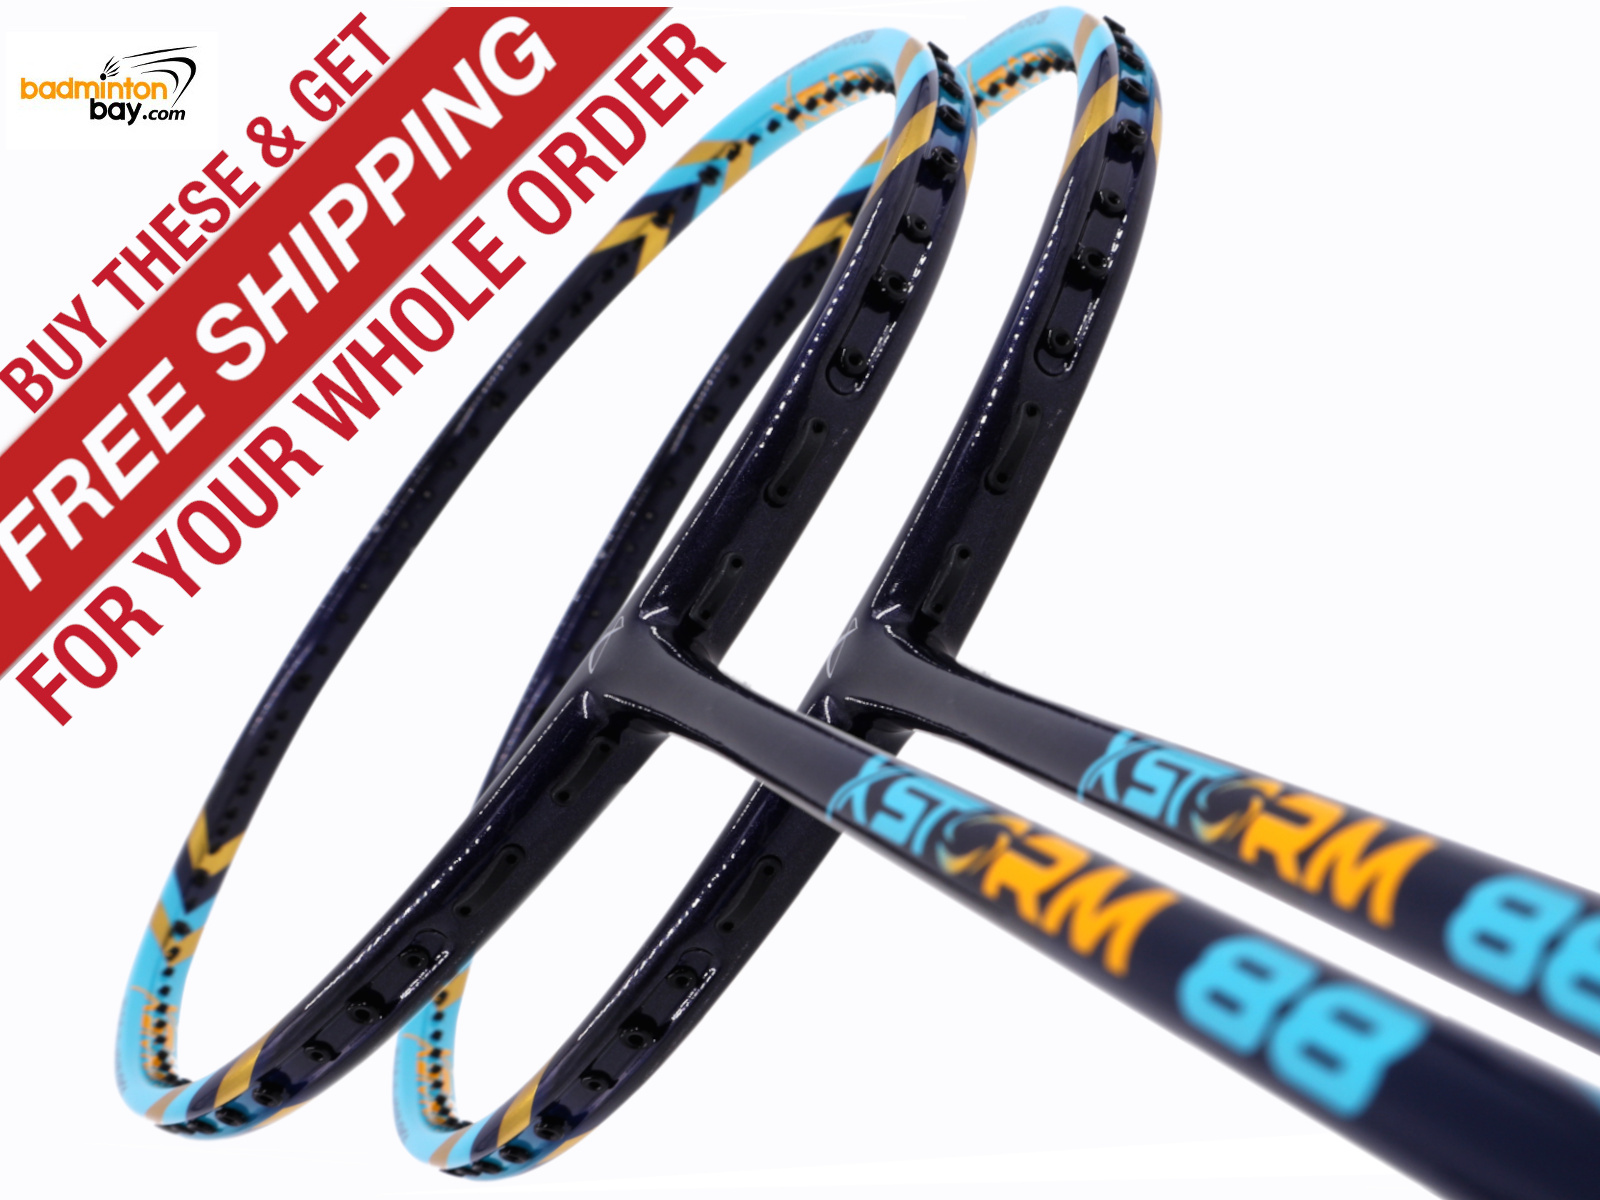 Buy these & get Free shipping for your whole order!
2 pieces Abroz XStorm 88 badminton racket.